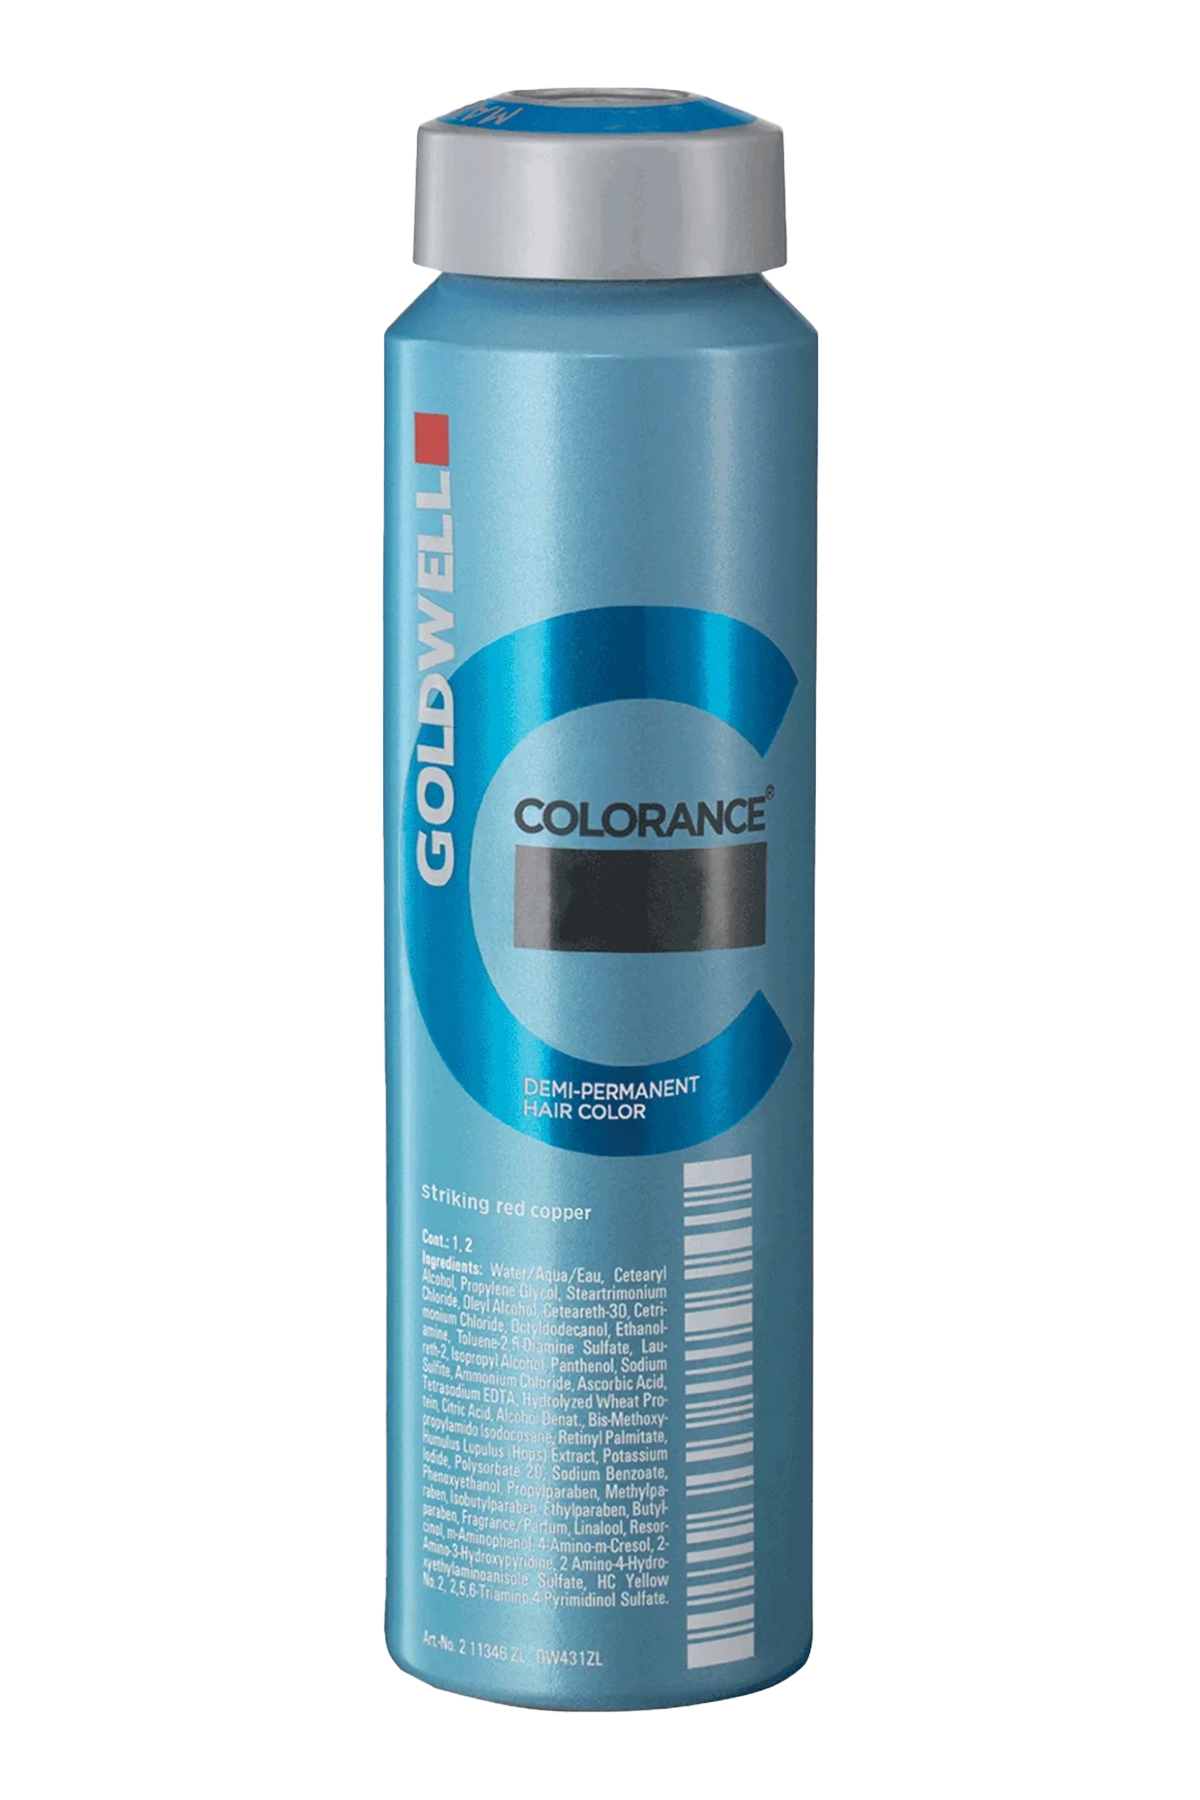 Goldwell Colorance Demi Permanent Hair Color $16